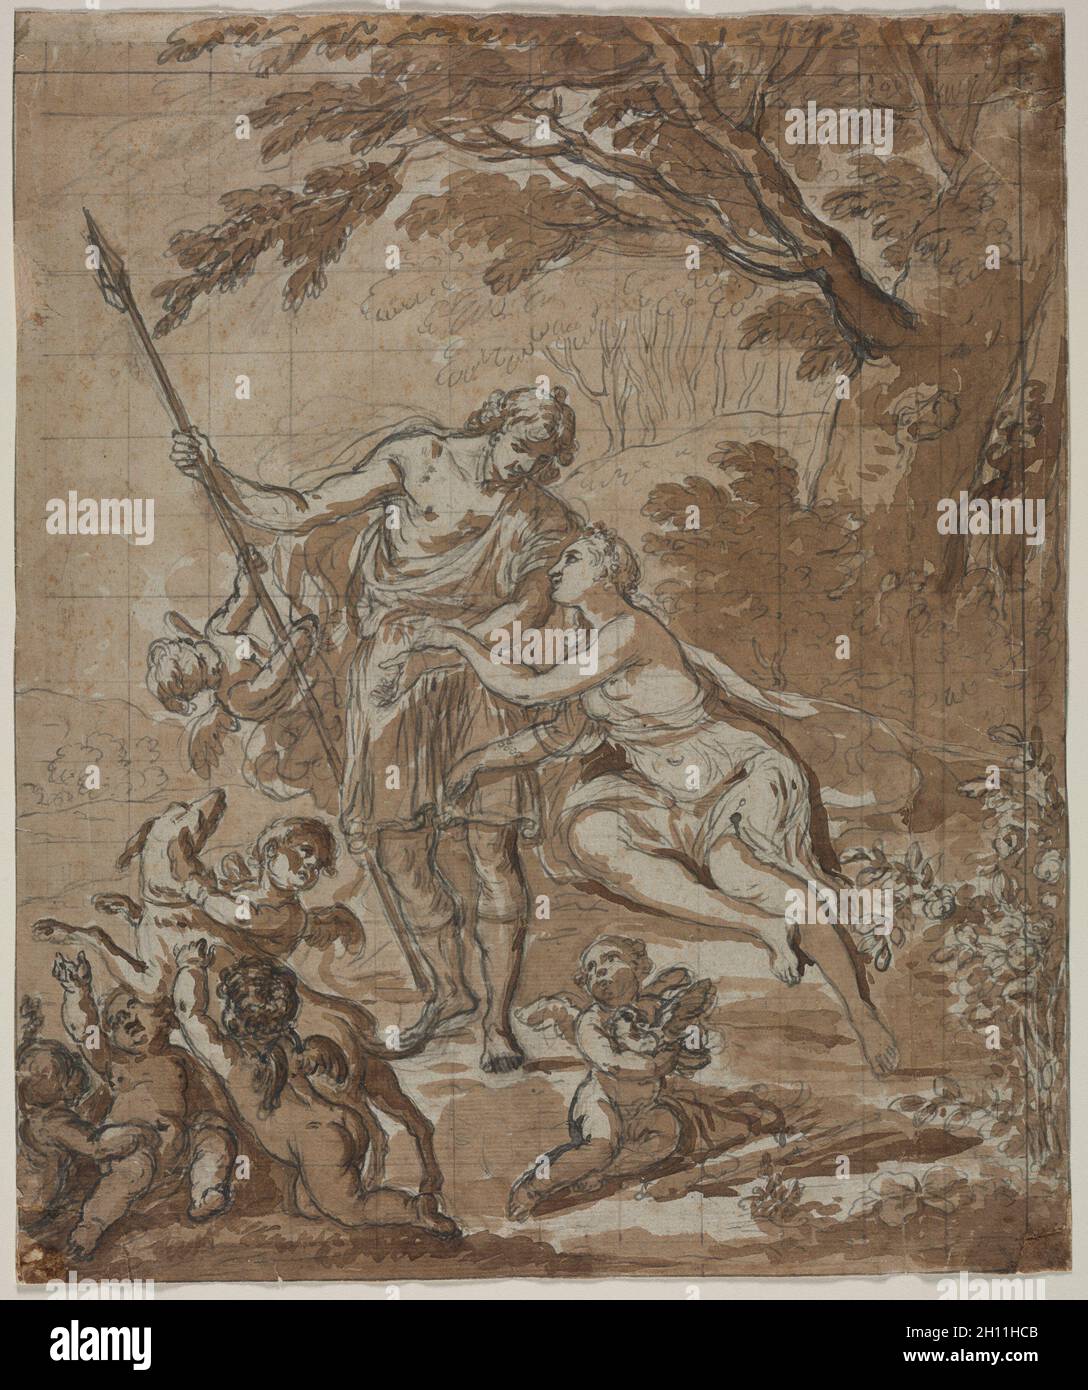 Venus and Adonis, 1713. France, 18th century. Black chalk, pen and gray ink with brown wash; matted: 29.8 x 24.9 cm (11 3/4 x 9 13/16 in.). Stock Photo